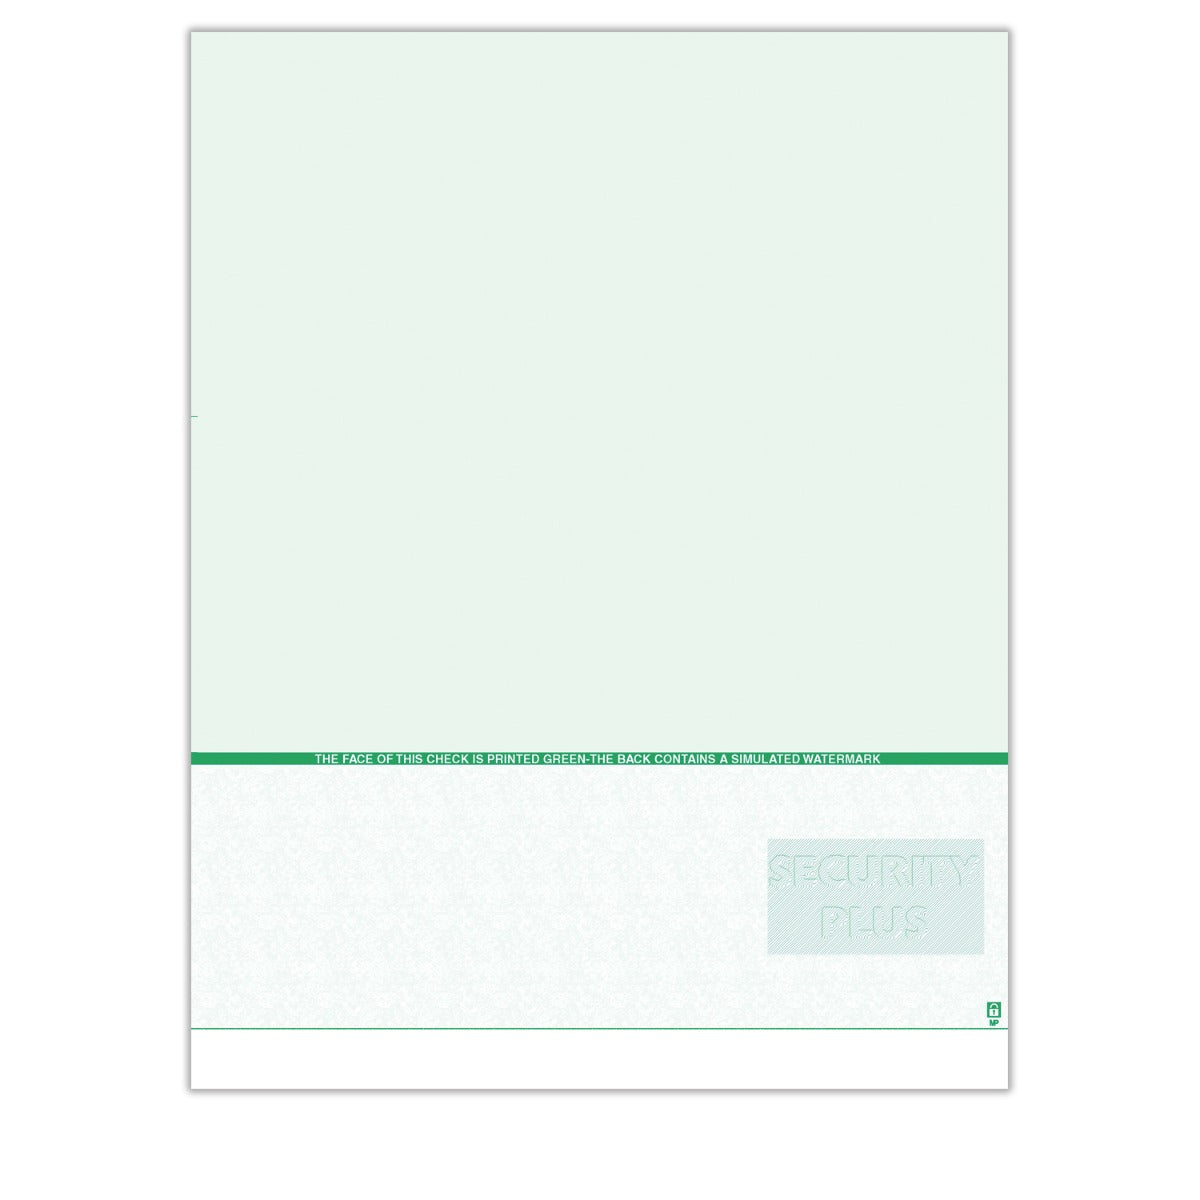 TROY Security Plus Check Paper, Green, Check Bottom, Ream